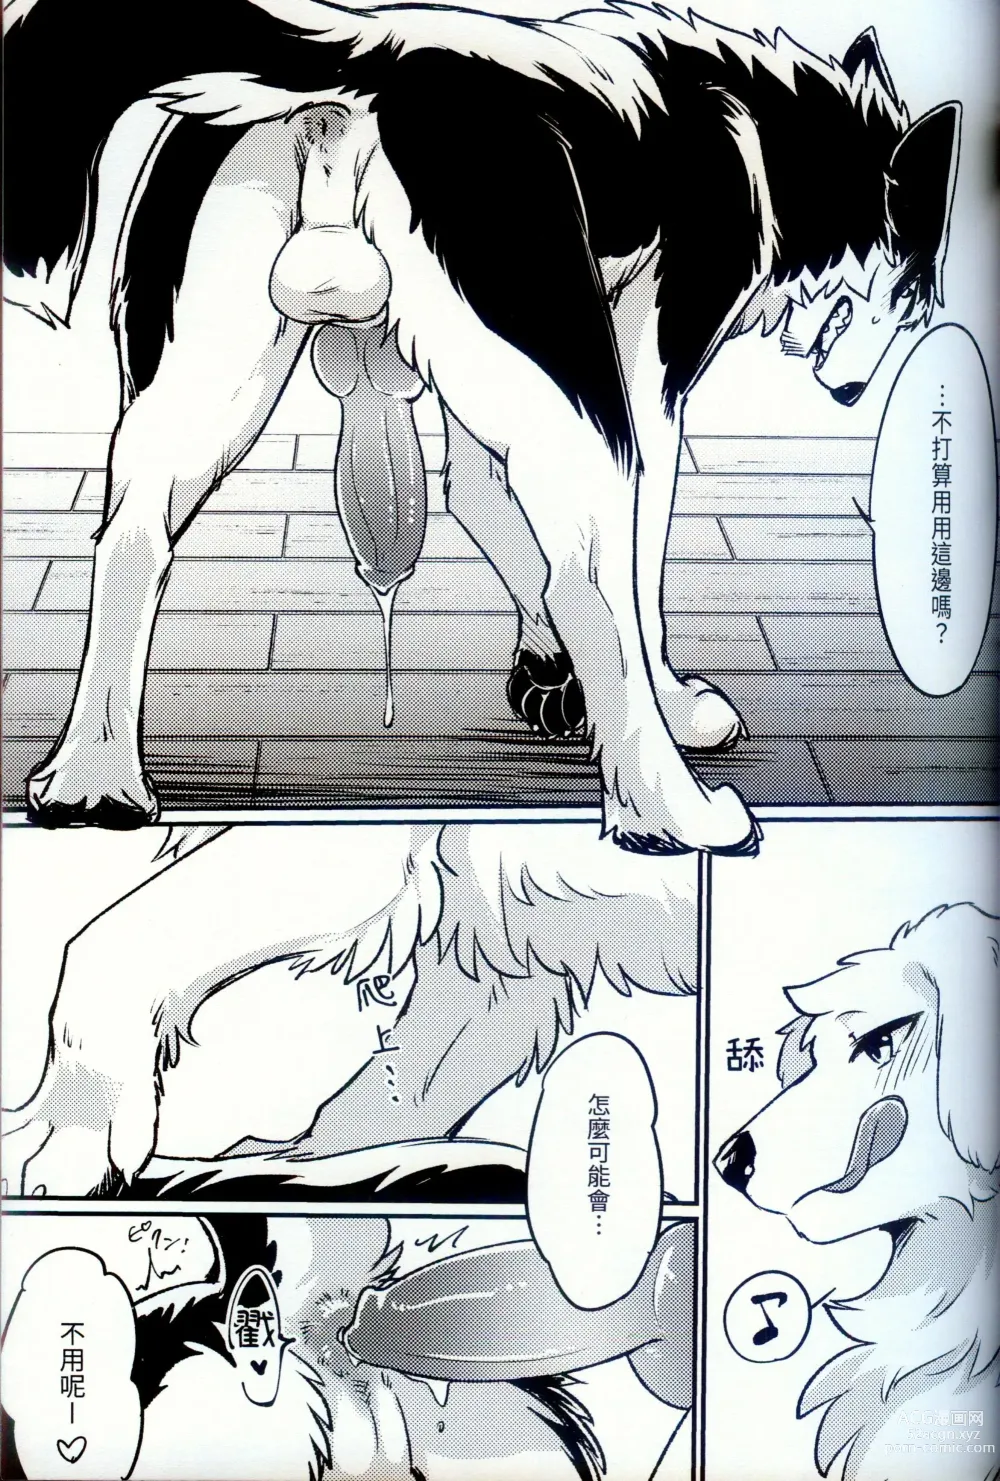 Page 10 of doujinshi More,more,MORE! (decensored)